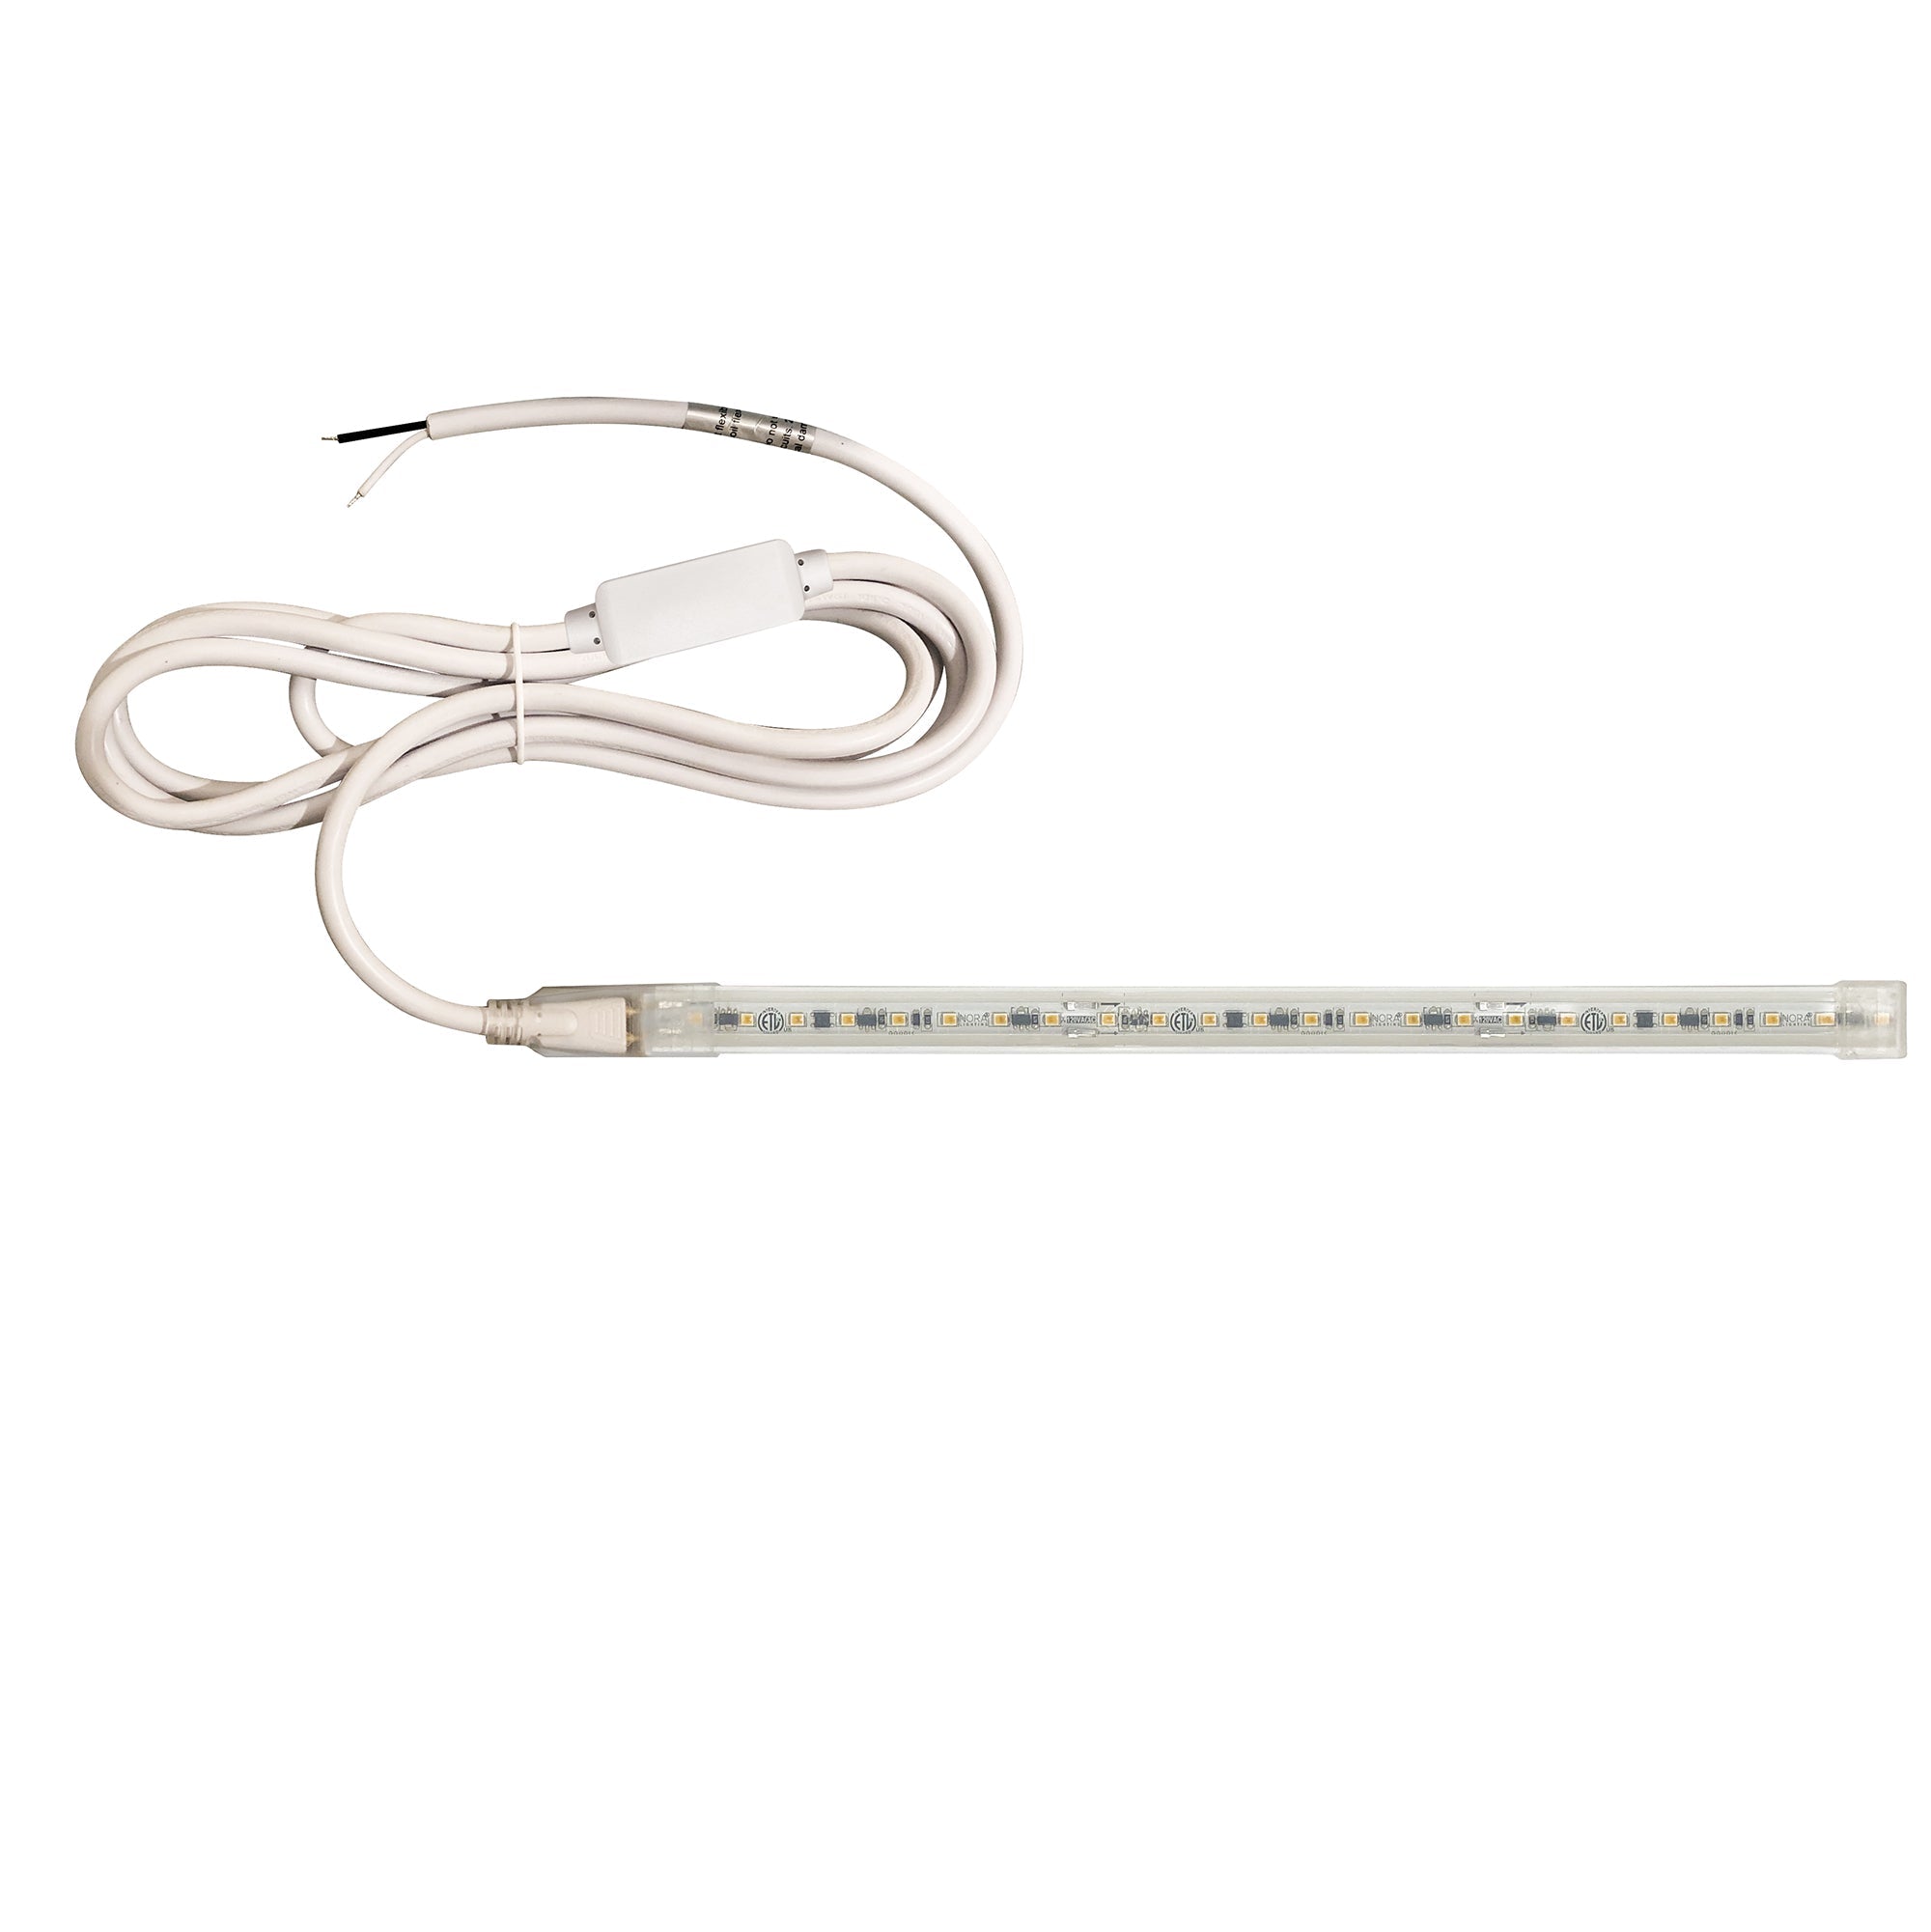 Nora Lighting NUTP13-W11-8-12-940/HWSP - Accent / Undercabinet - Custom Cut 11-ft, 8-in 120V Continuous LED Tape Light, 330lm / 3.6W per foot, 4000K, w/ Mounting Clips and 8' Hardwired Power Cord w/ Surge Protector